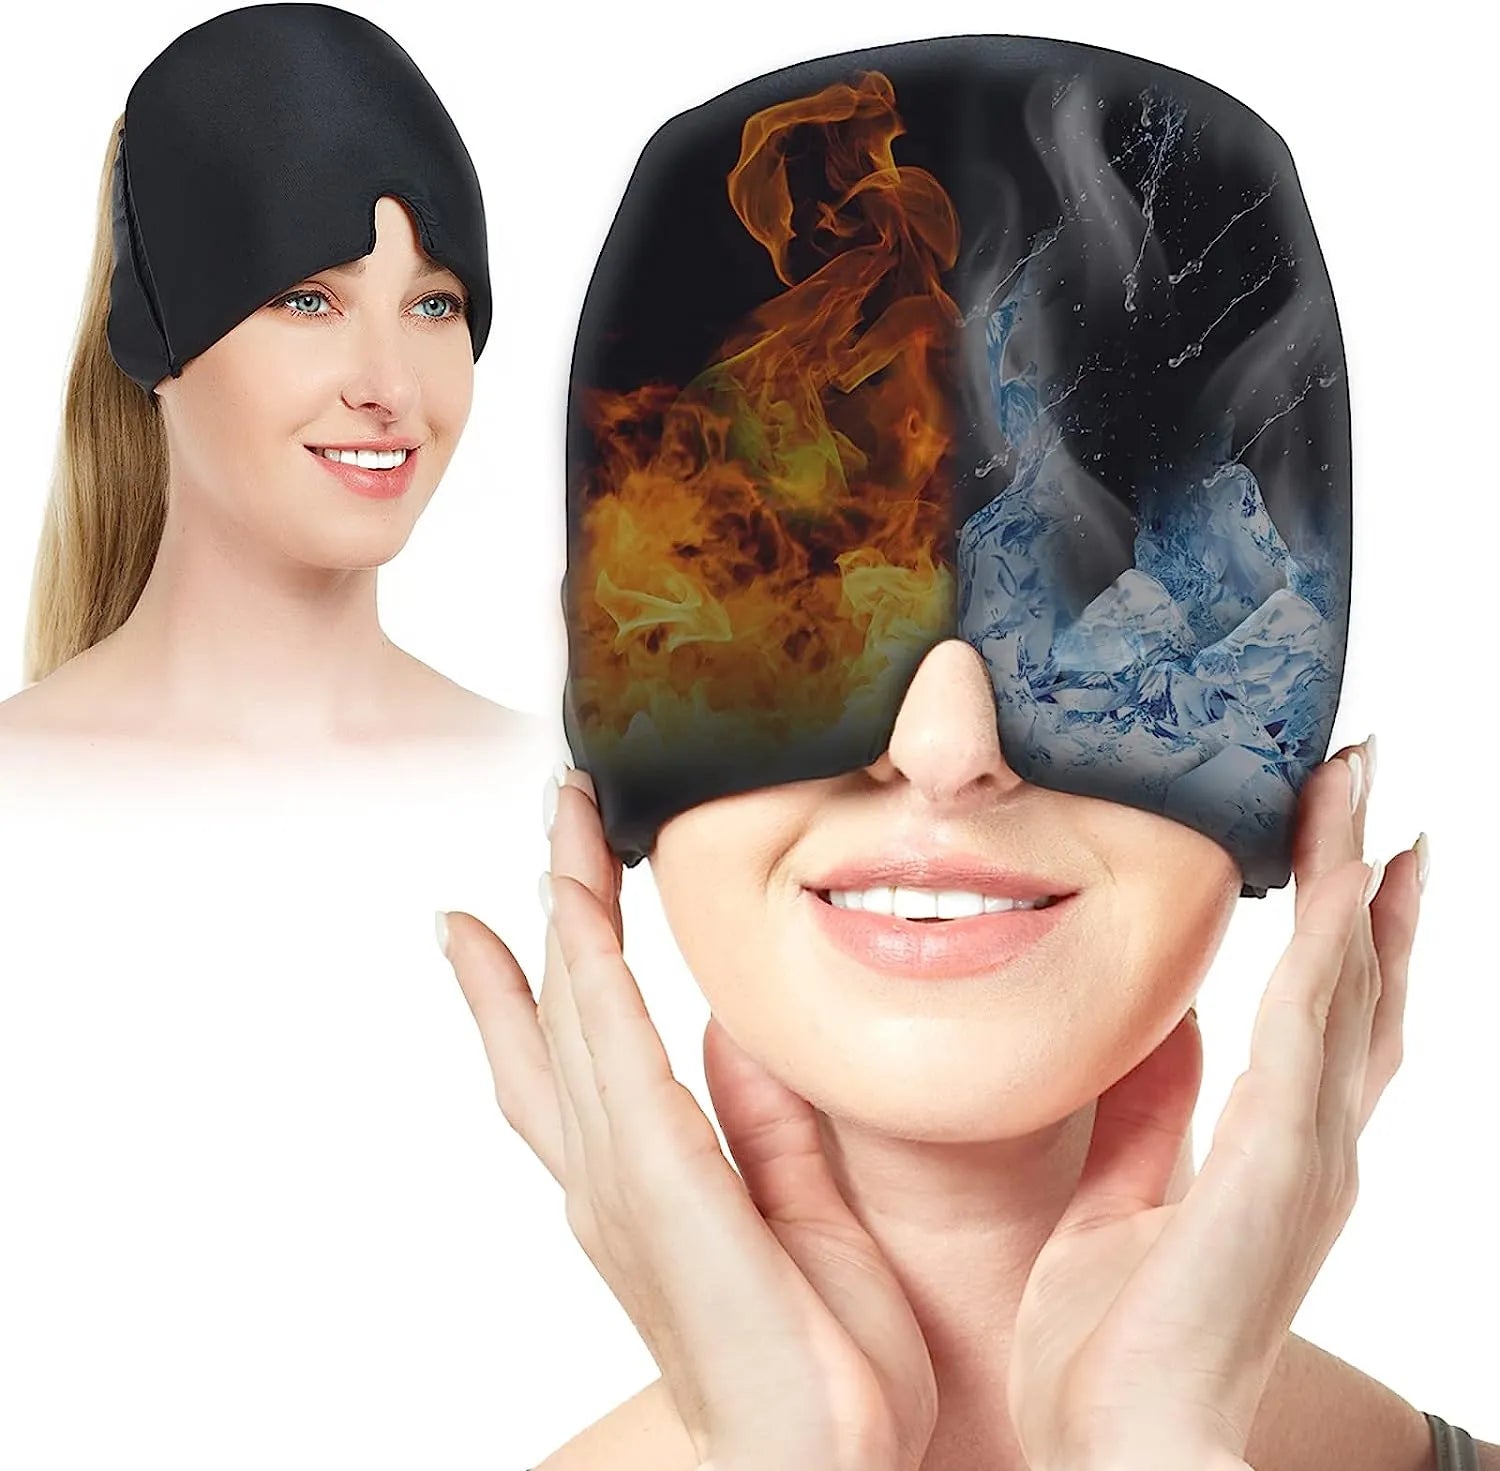 Migraine Relief Hat headache hat Gel Hot Cold Therapy Ice Cap For Relieve Pain Ice Hat Eye Mask Stress Pressure Pain Relief